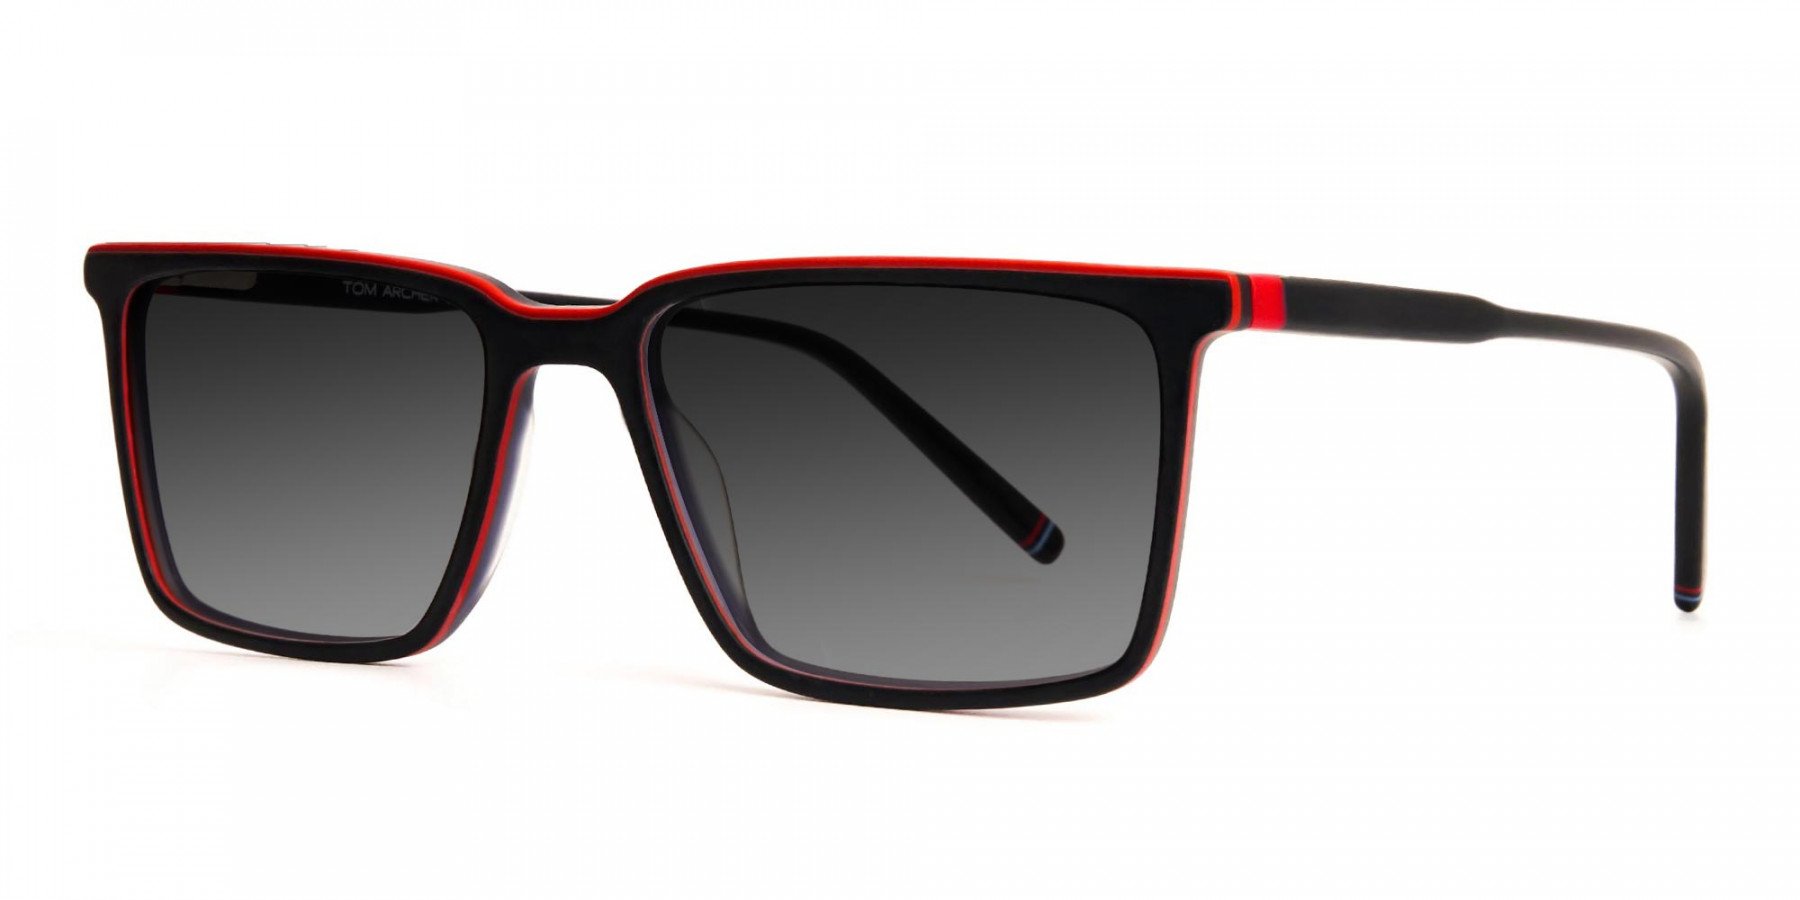 black-and-red-rectangular-grey-tinted-sunglasses-frames-1